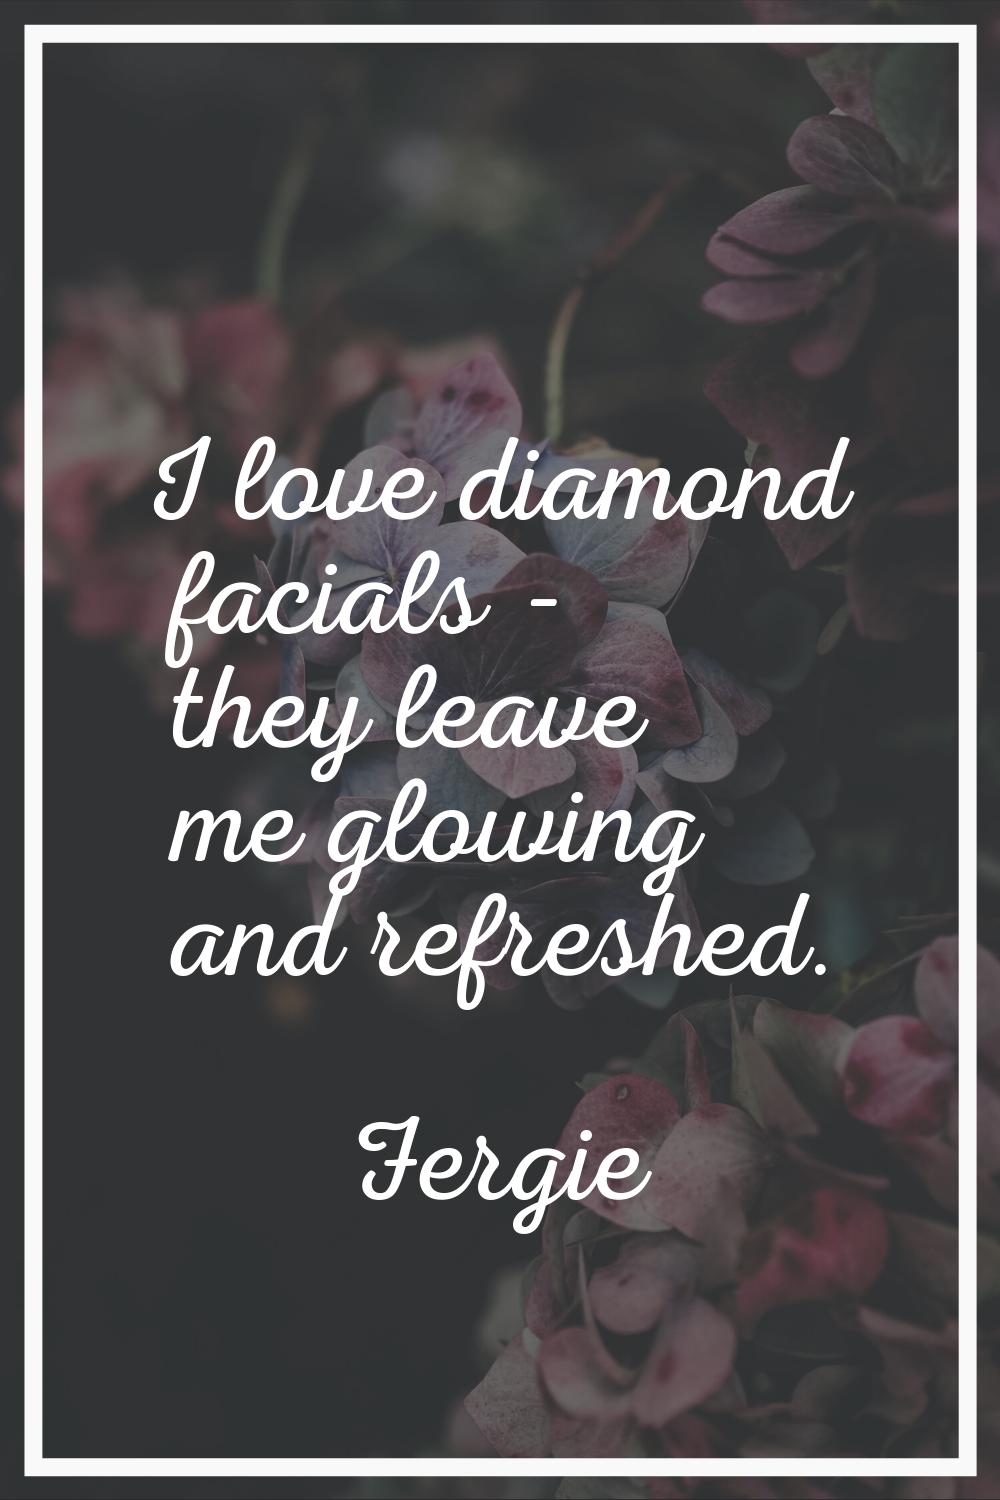 I love diamond facials - they leave me glowing and refreshed.